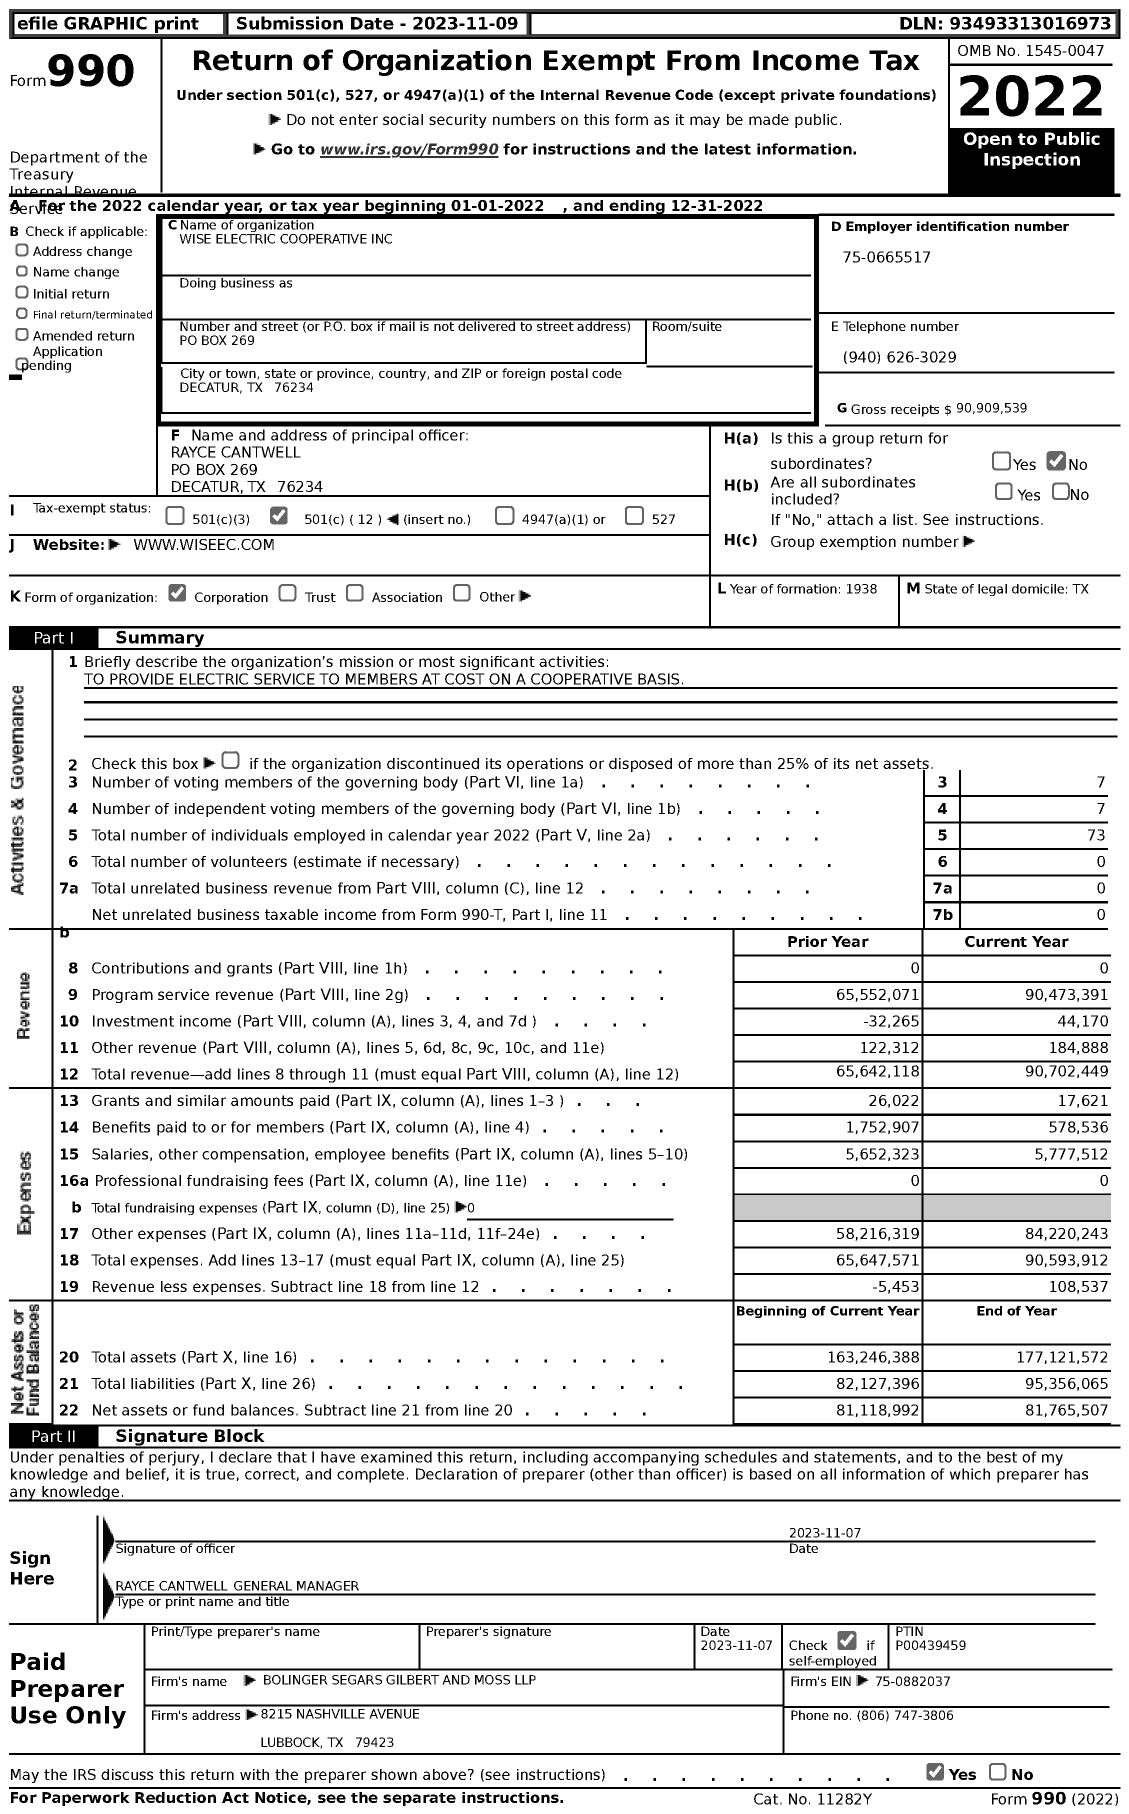 Image of first page of 2022 Form 990 for Wise Electric Cooperative